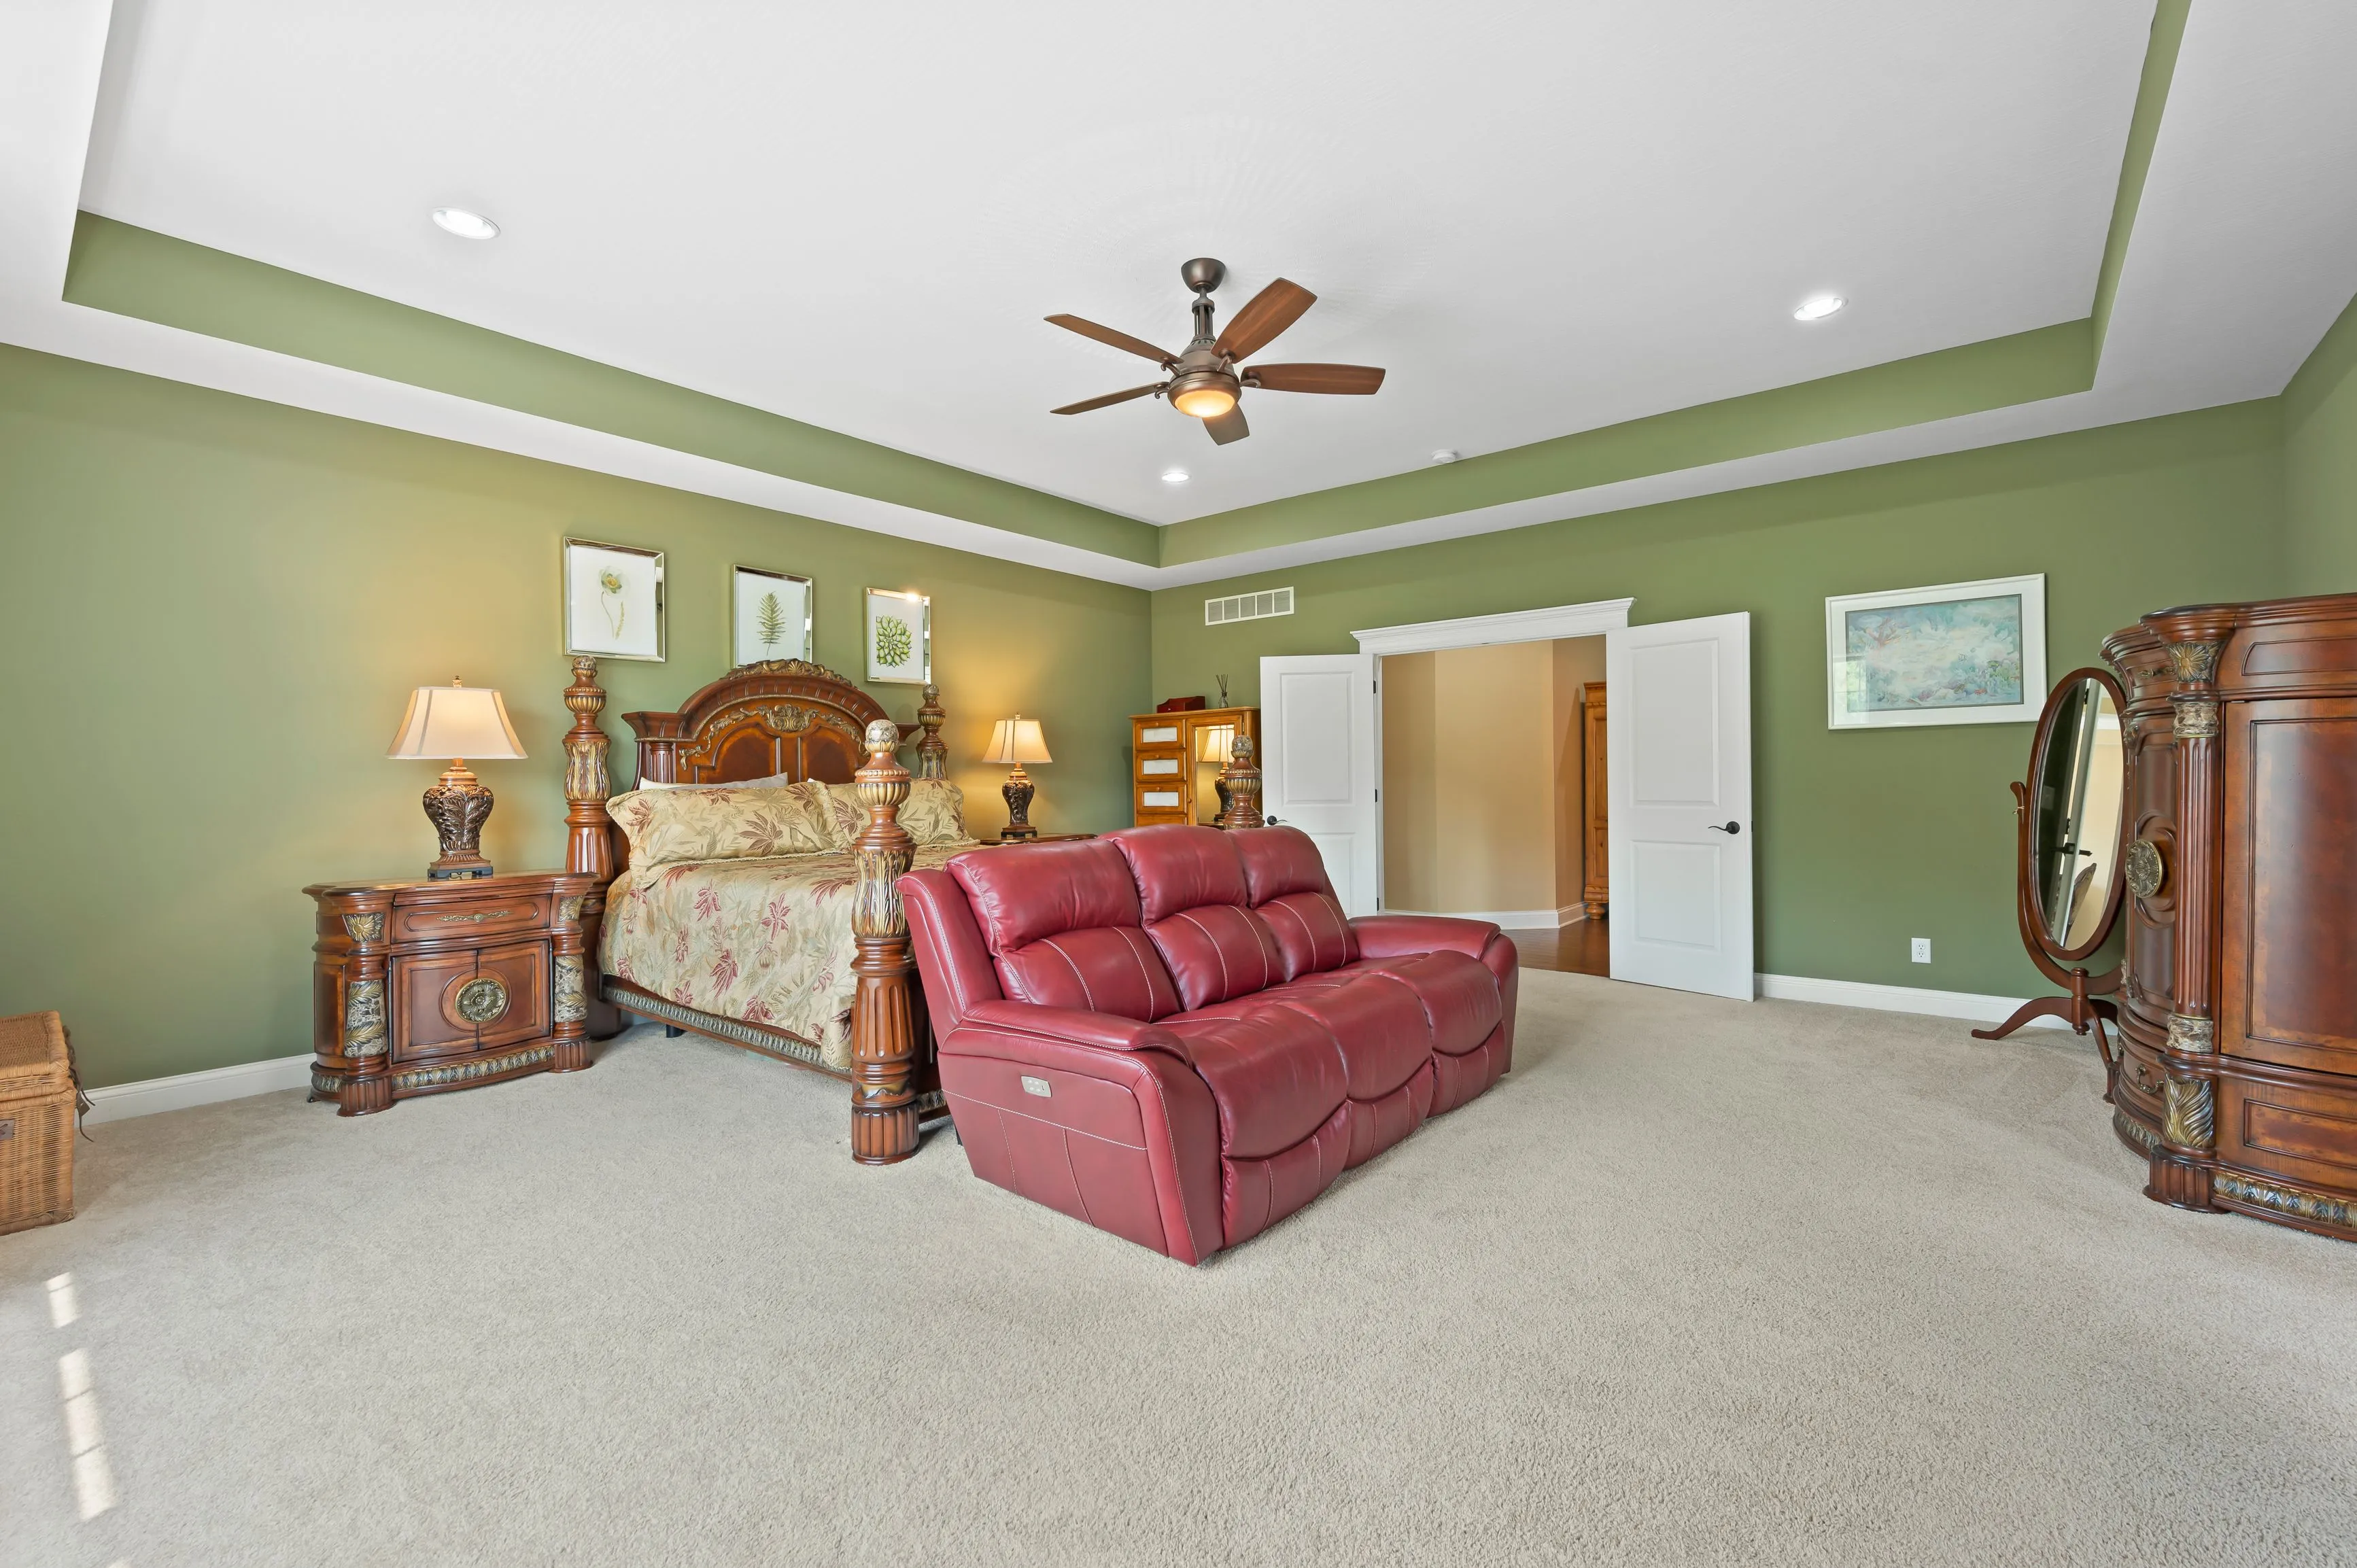 Spacious bedroom with green walls, a large bed with an ornate headboard, red leather sofa, wooden furniture, a ceiling fan, and cream carpet flooring.